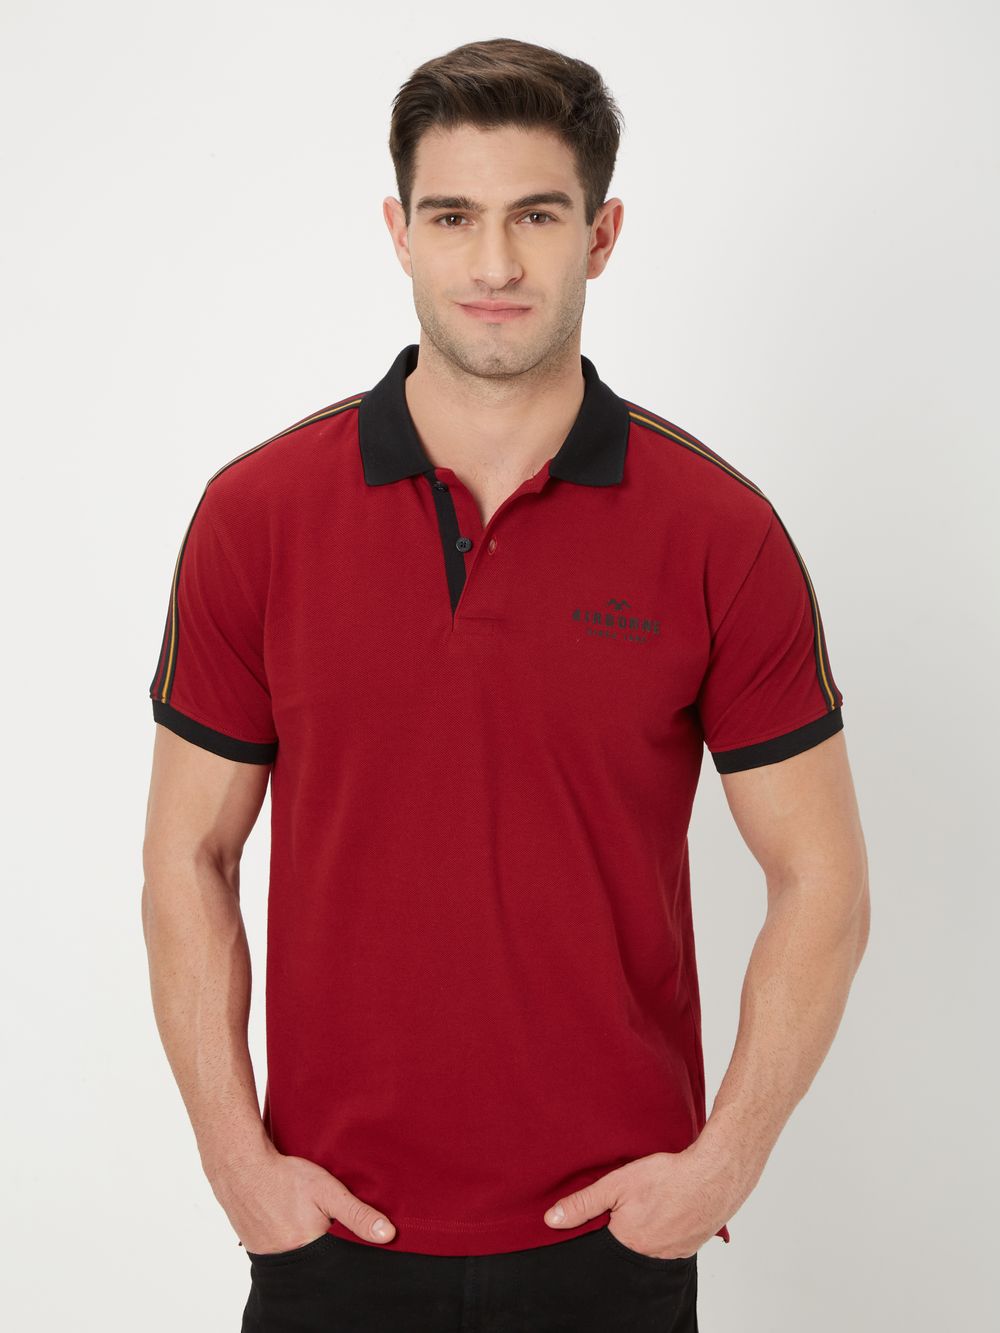 Red & Yellow Taped Pique Polo T-Shirt